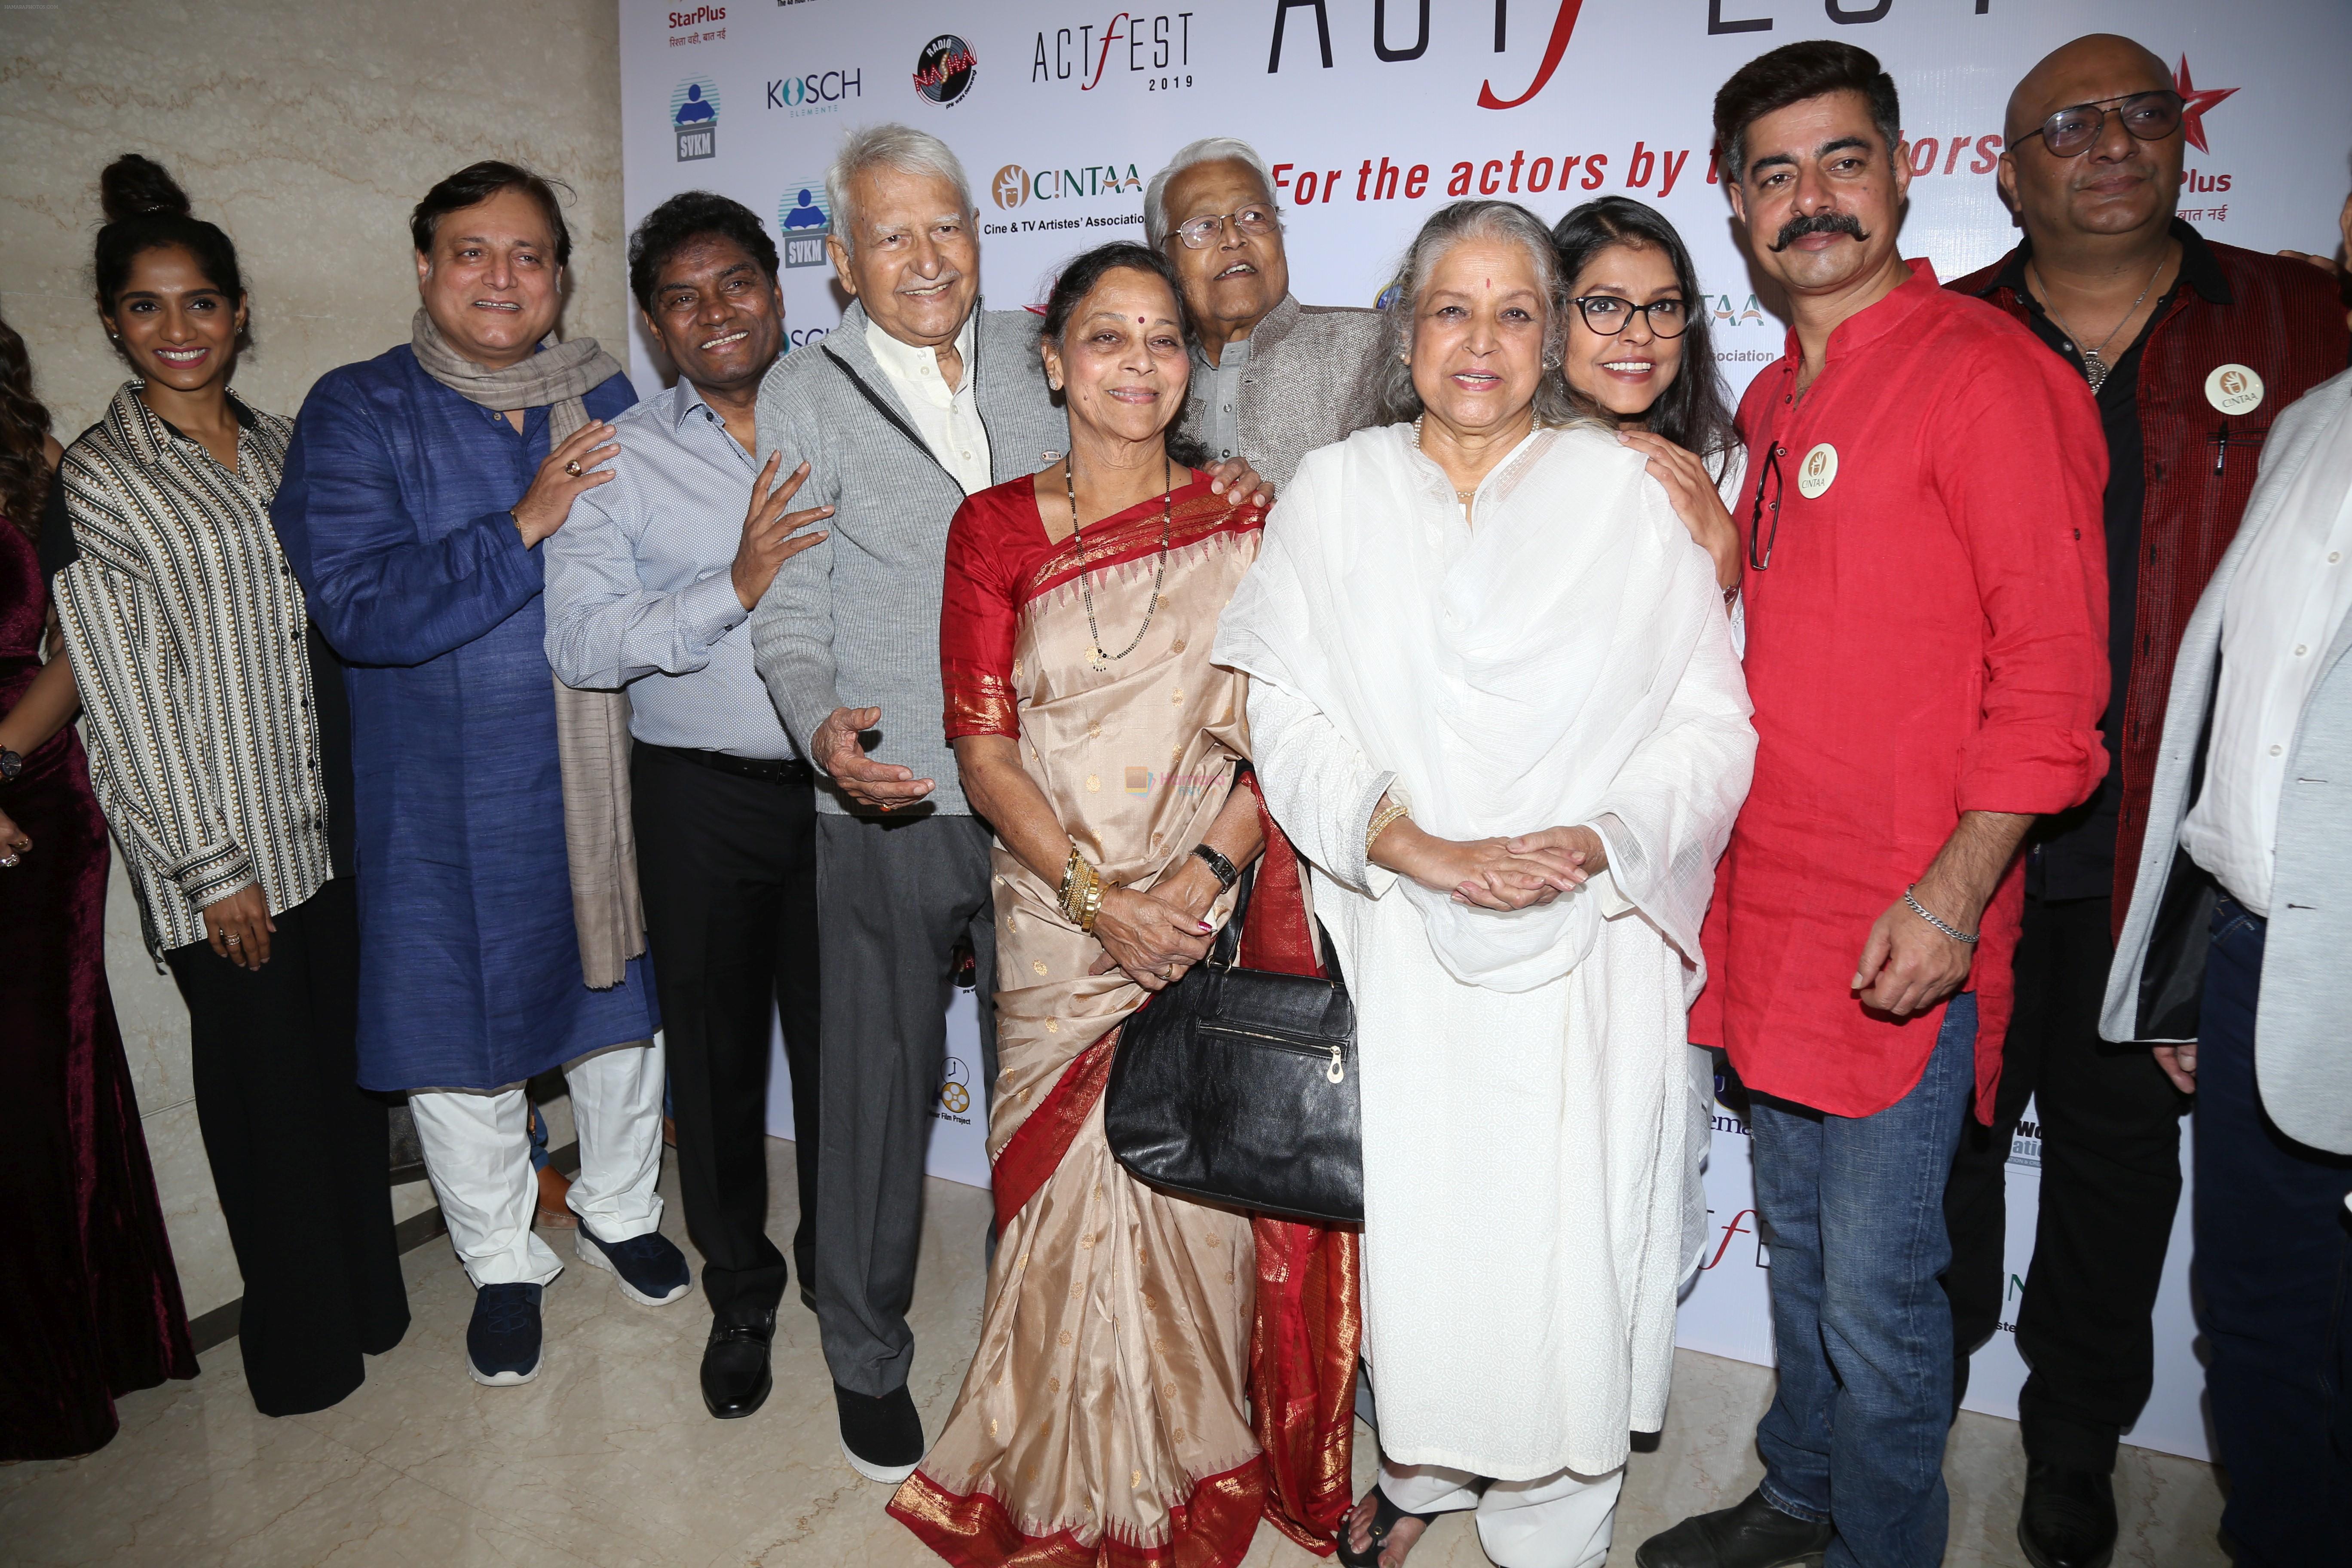 Manoj Joshi, Johnny Lever,Shubha Khote, Sushant Singh at the Cintaa 48hours film project's actfest at Mithibai College in vile Parle on 17th Feb 2019